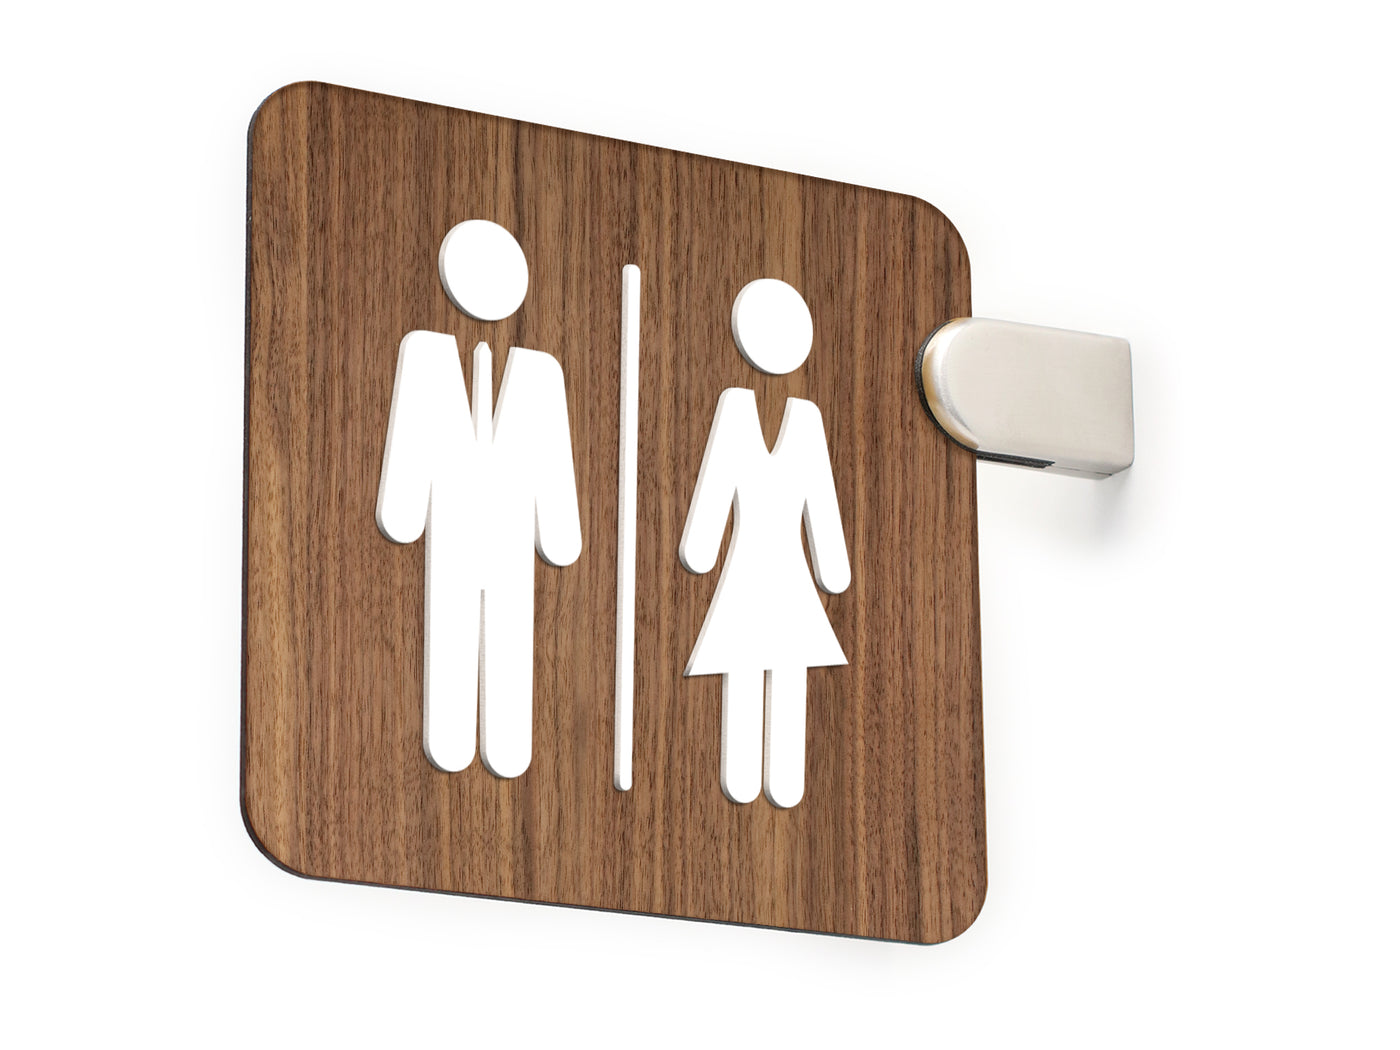 Formal - Restroom double sided Projecting sign - Symbols of your choice